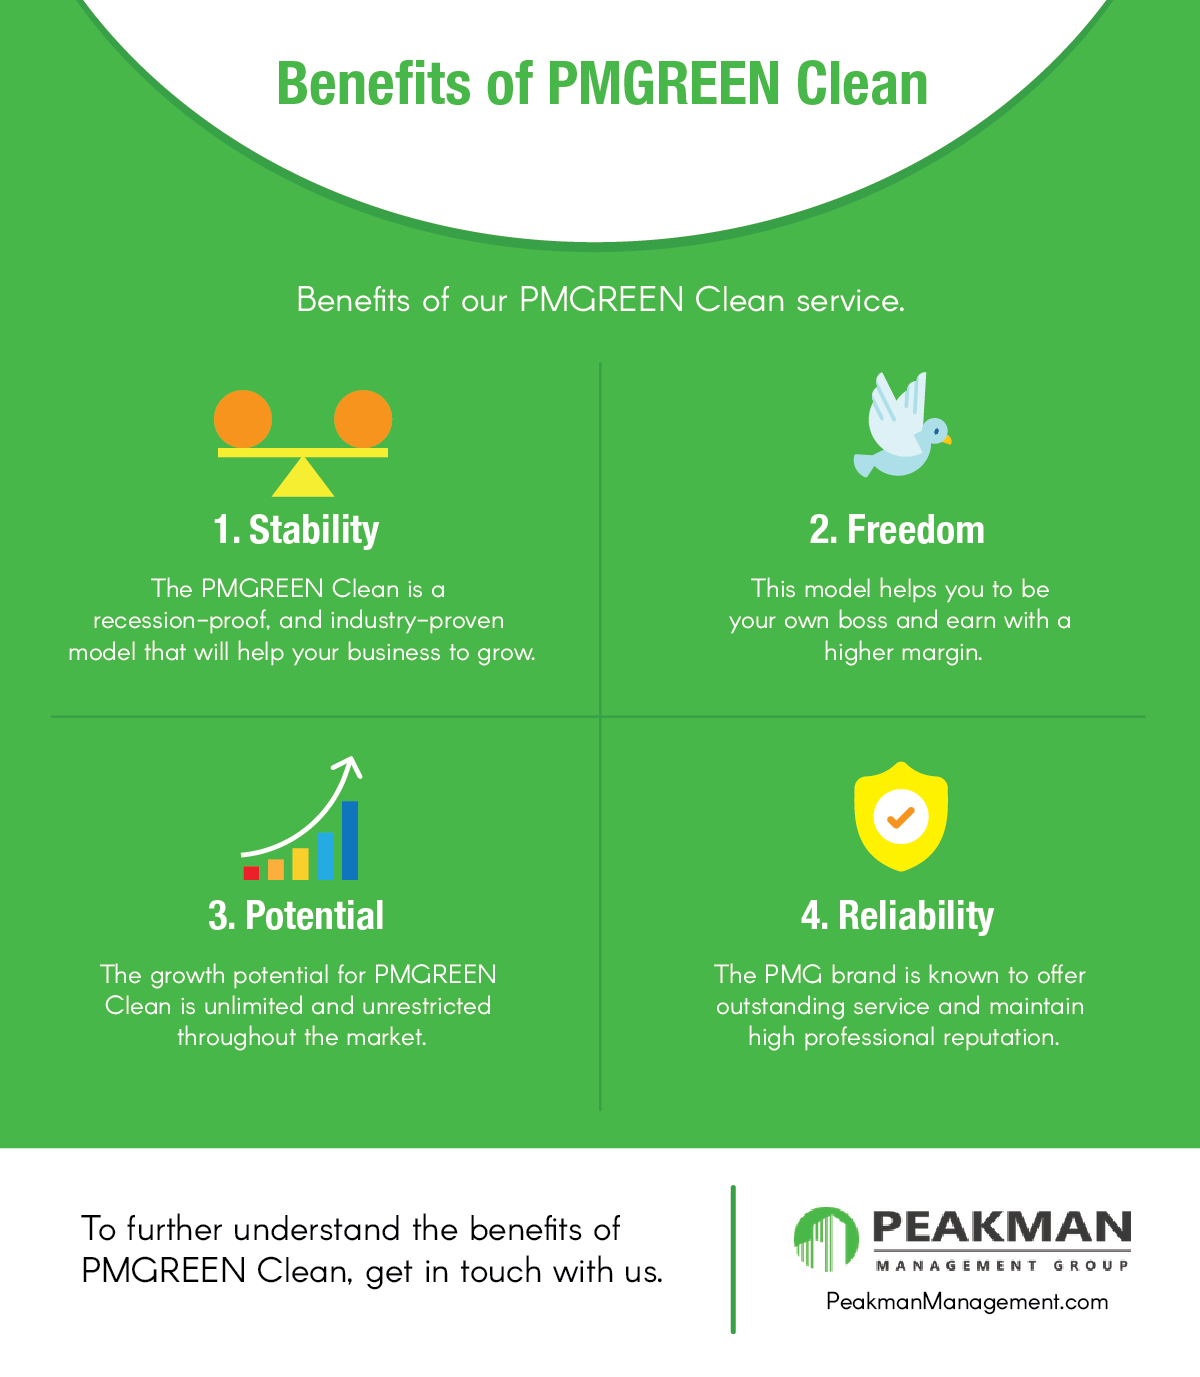 Benefits of PMGREEN Clean